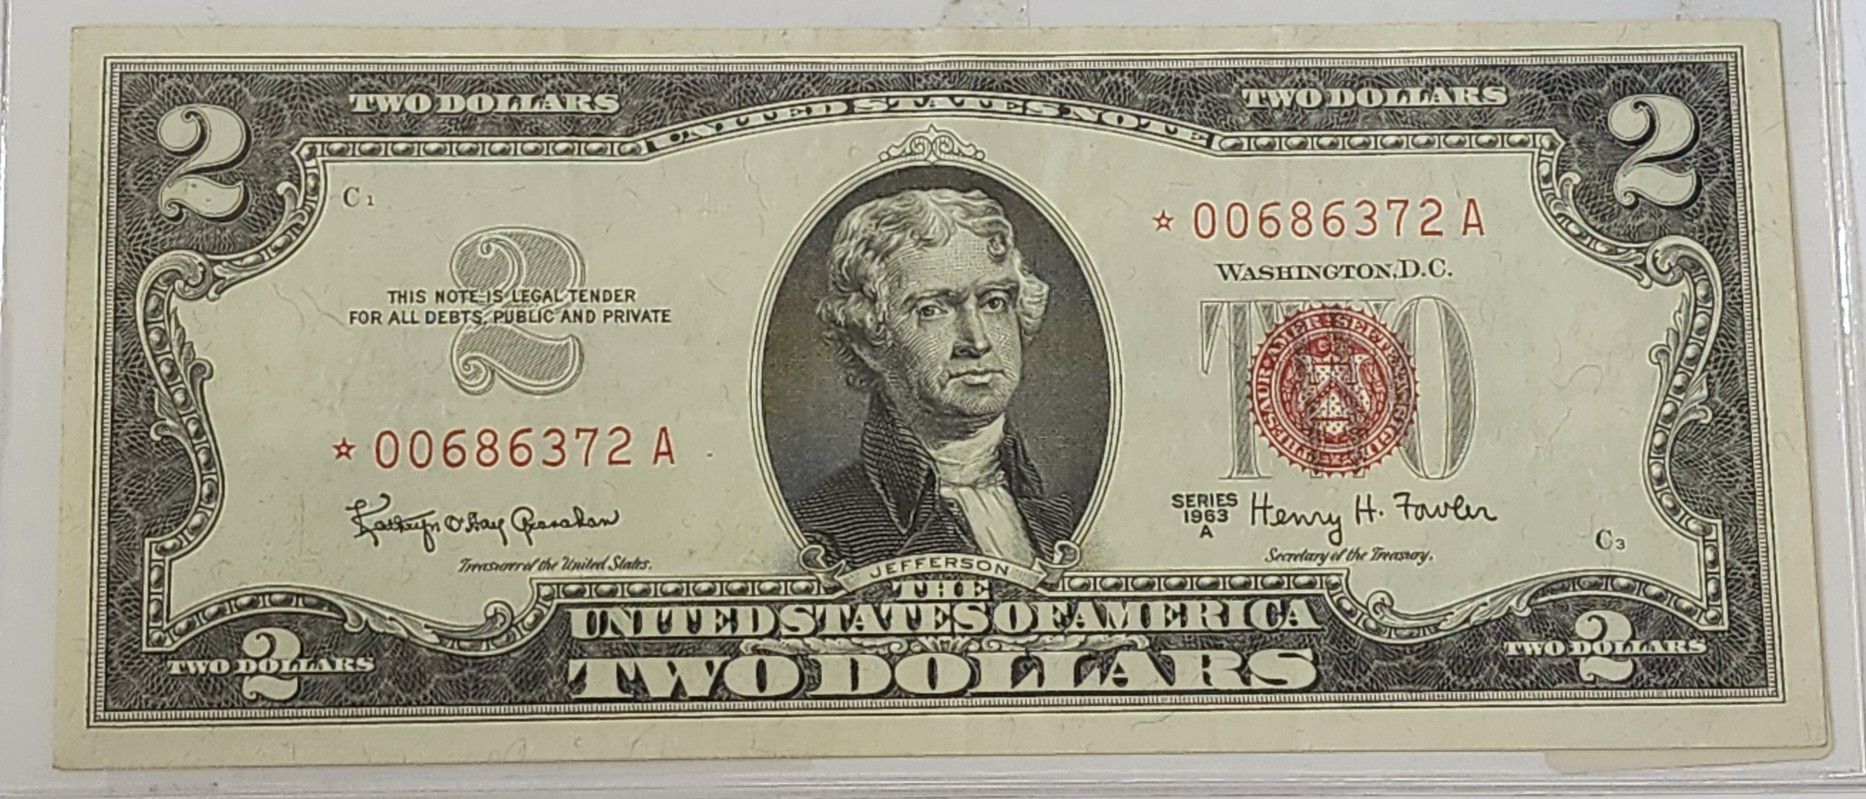 $2 1963 FR. 1514 Star Note